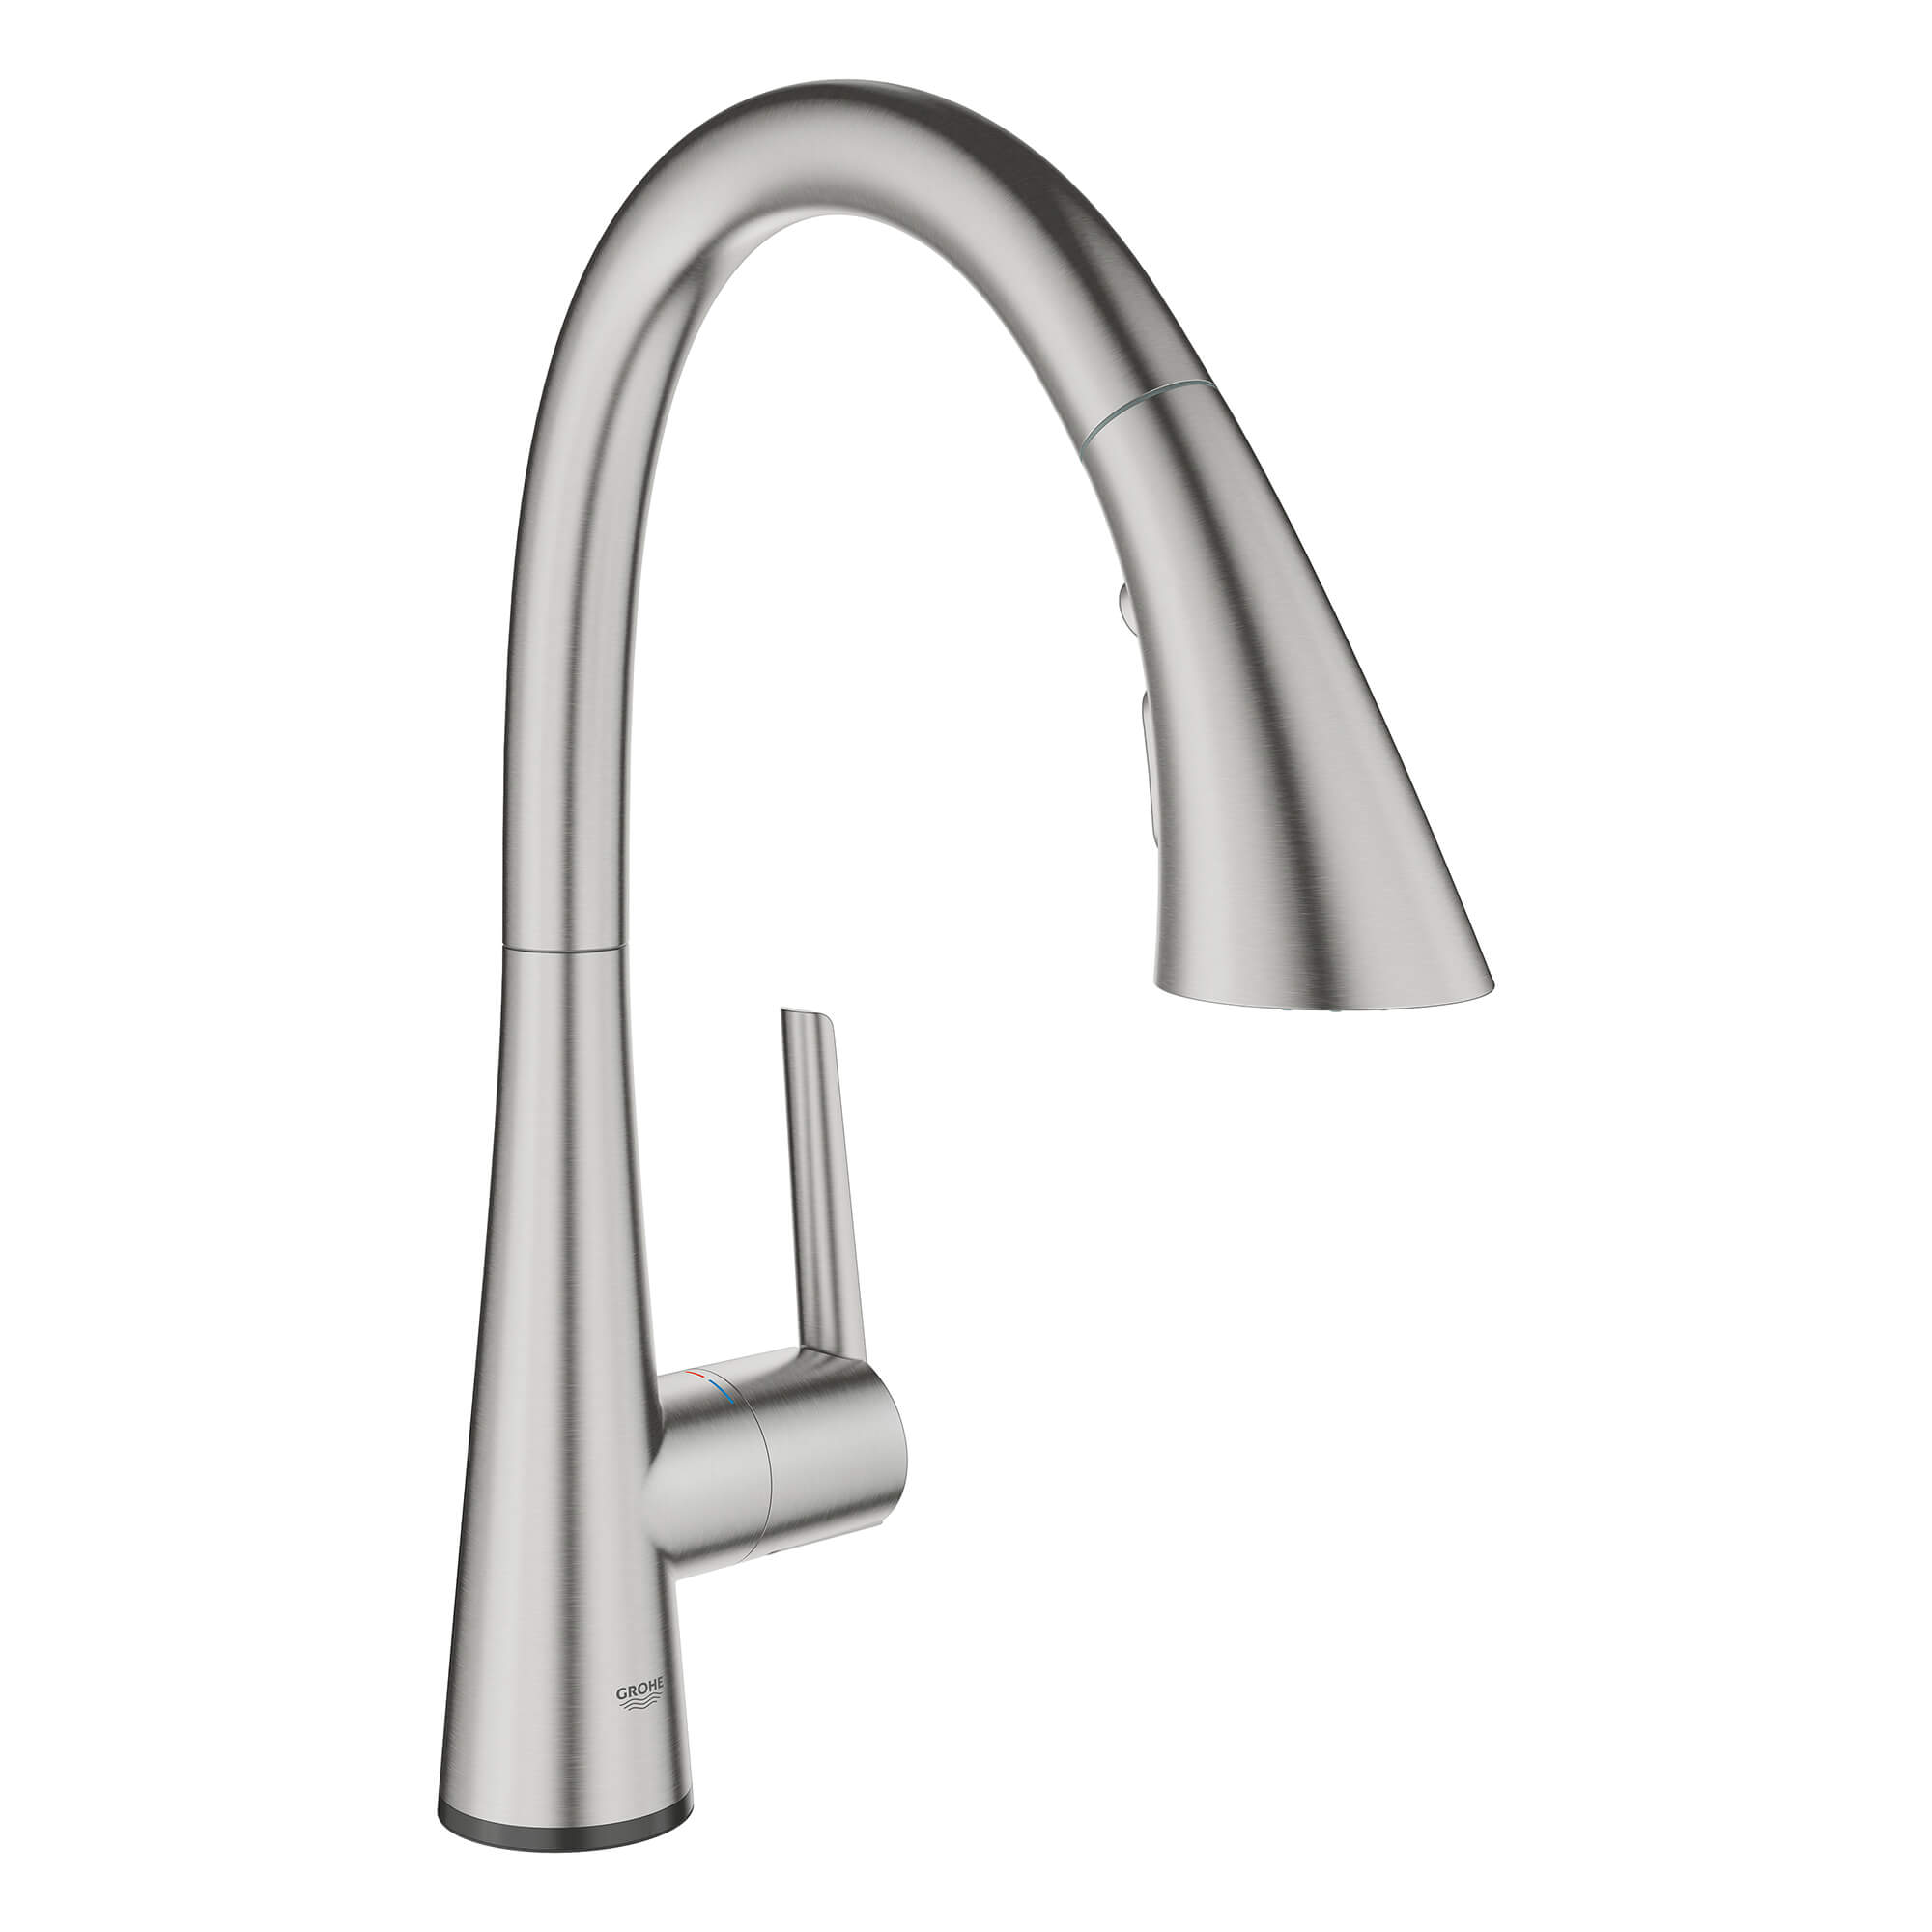 Single-Handle Pull Down Kitchen Faucet Triple Spray 6.6 L/min (1.75 gpm) with
Touch Technology